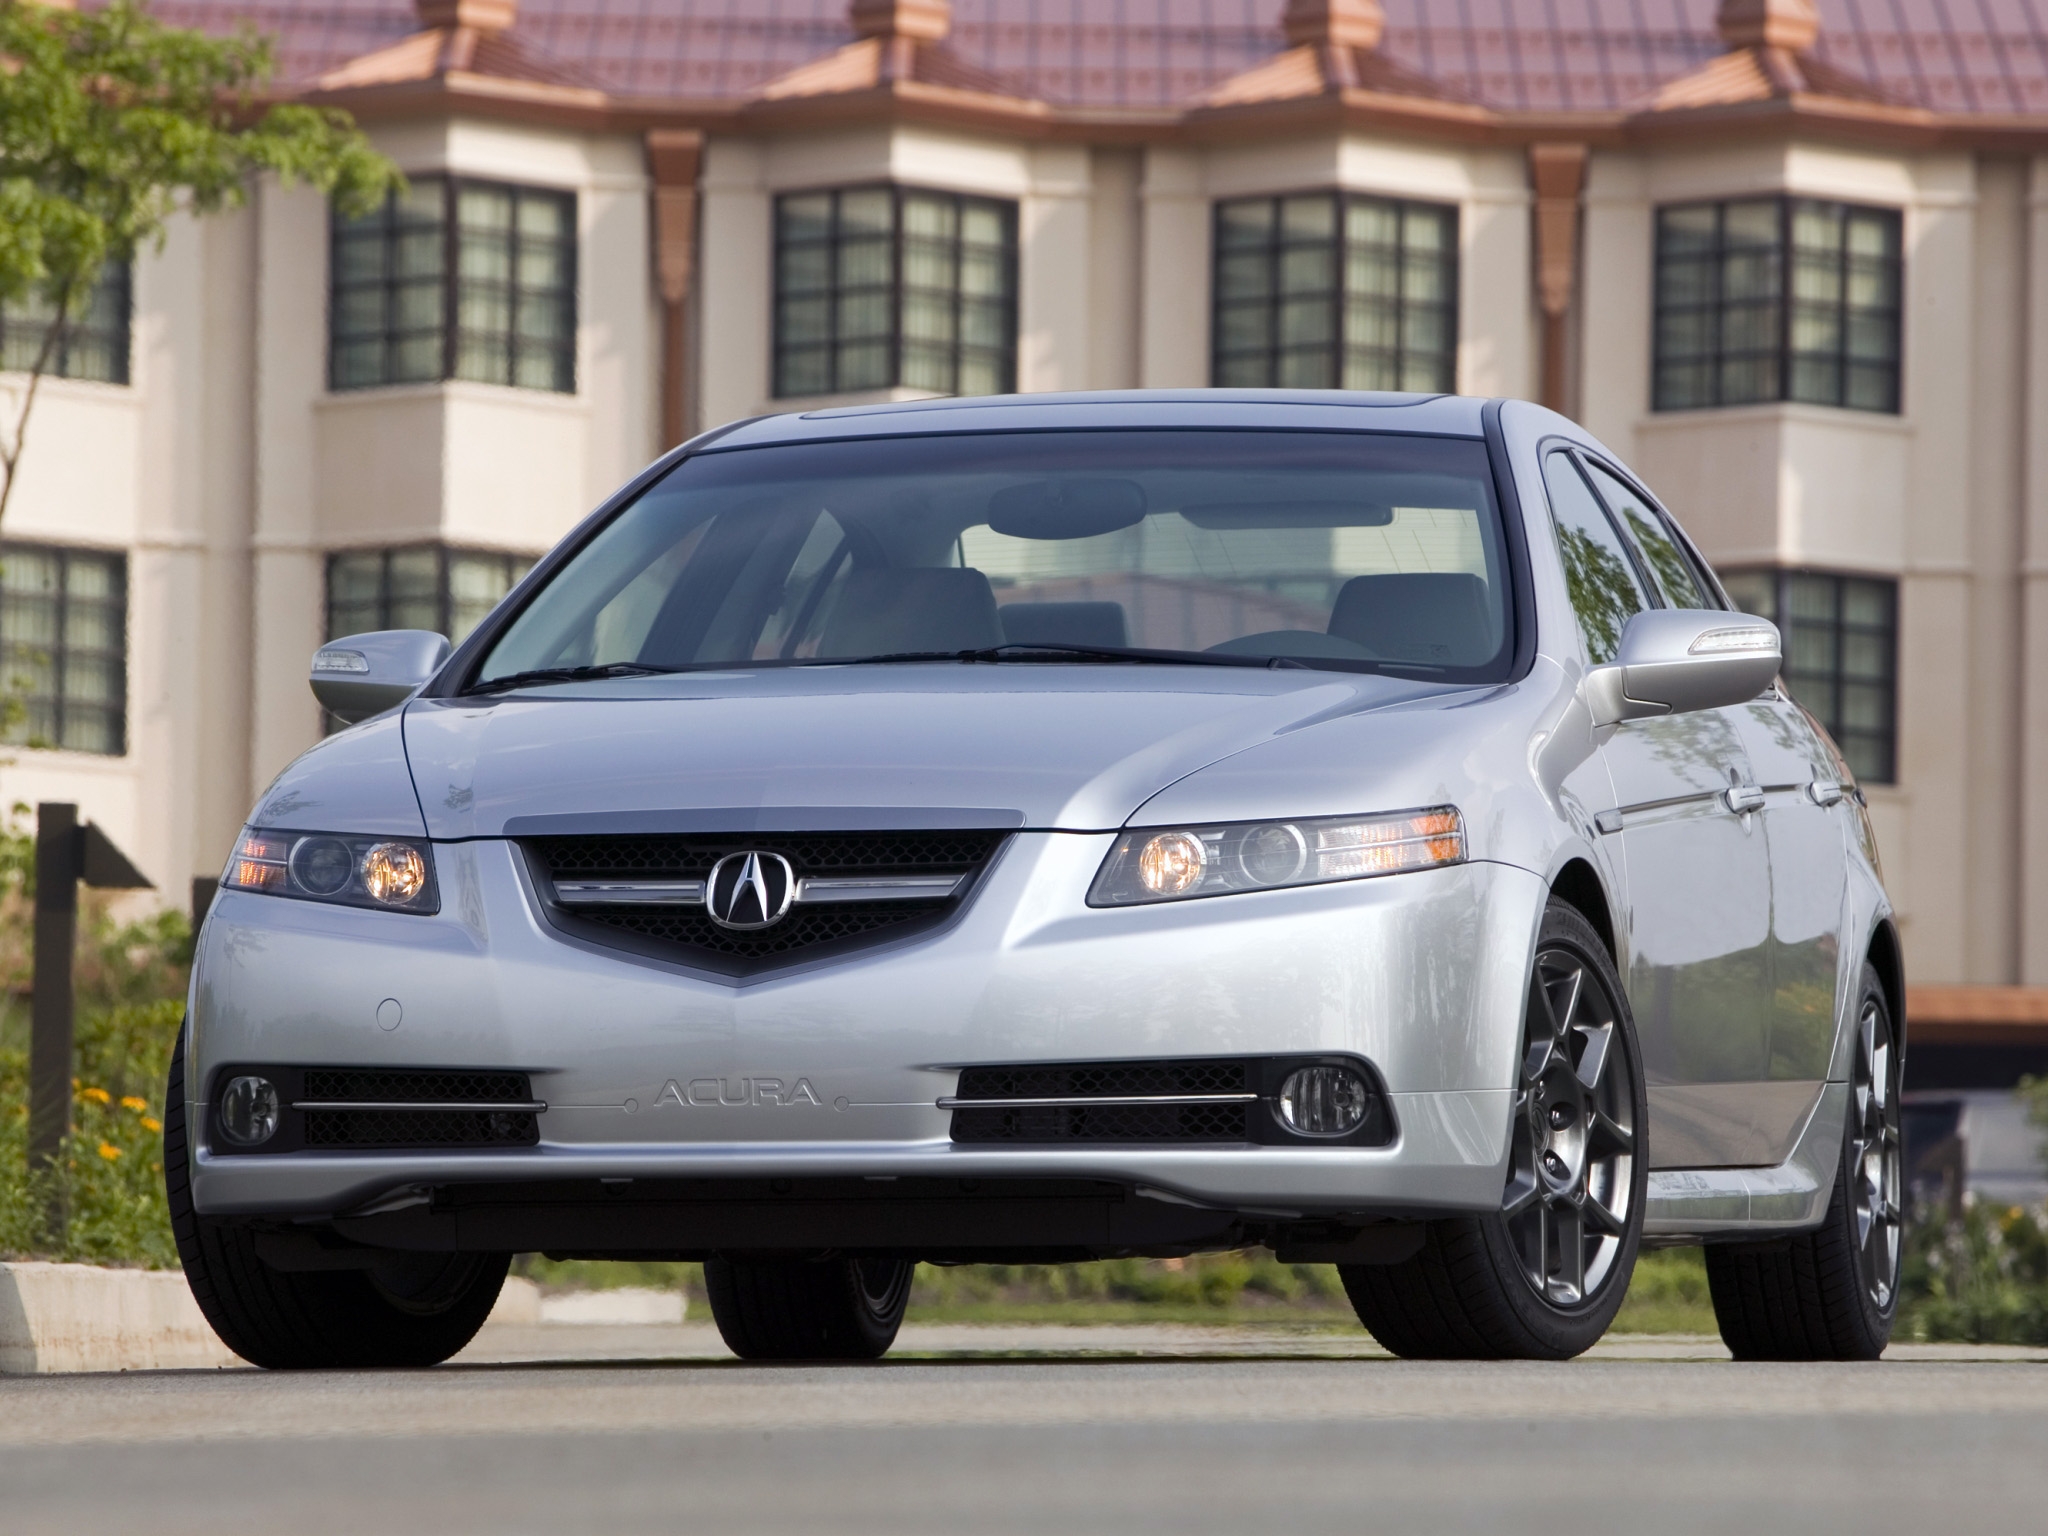 1920 x 1080 picture auto, grass, acura, cars, asphalt, front view, house, style, akura, tl, silver metallic